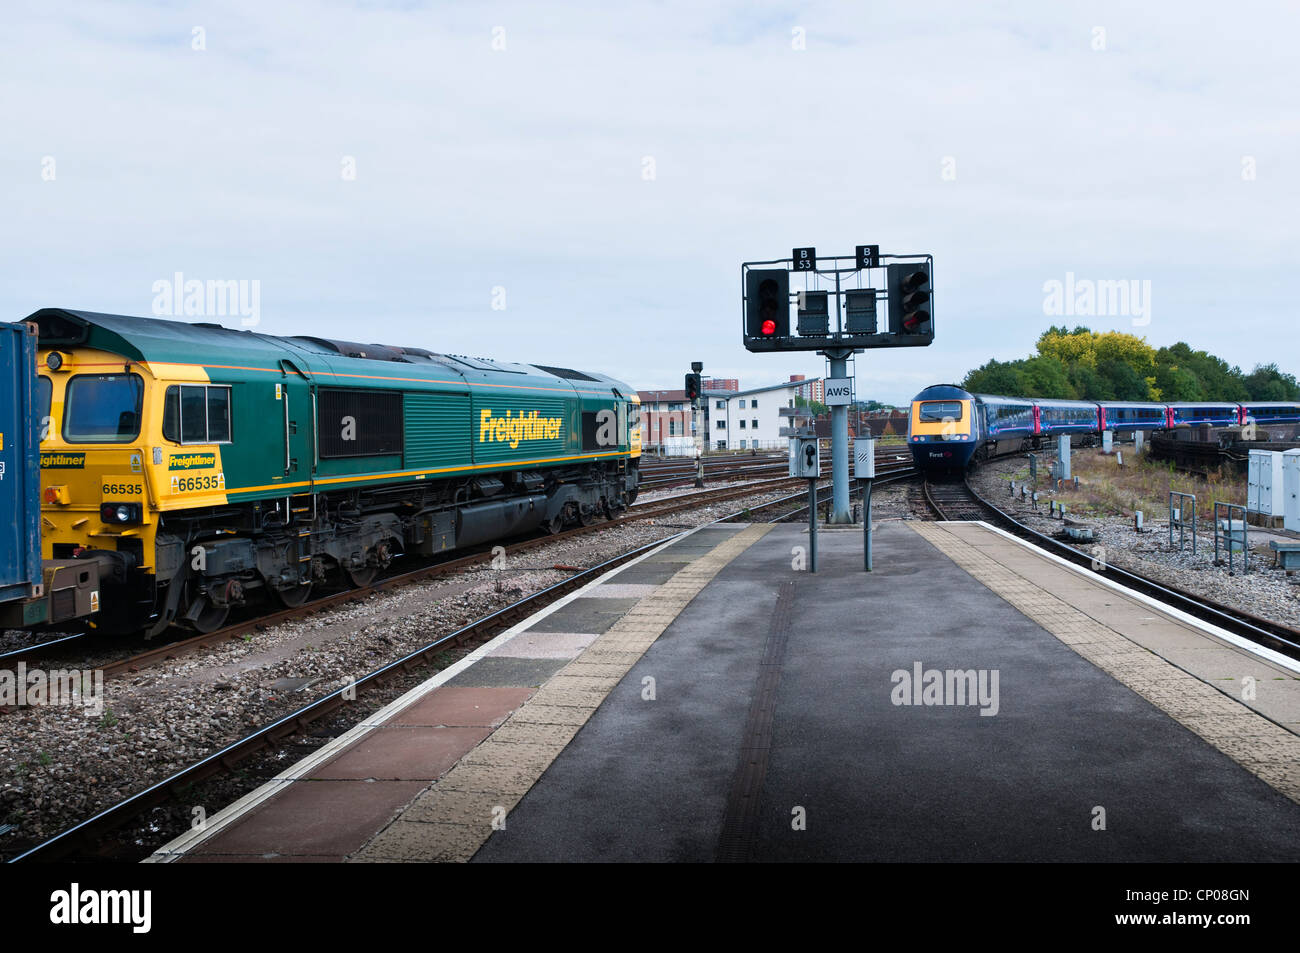 A  Freightliner Class 66 locomotive heading a train of container freight wagons, while a passenger train leaves on another line. Stock Photo